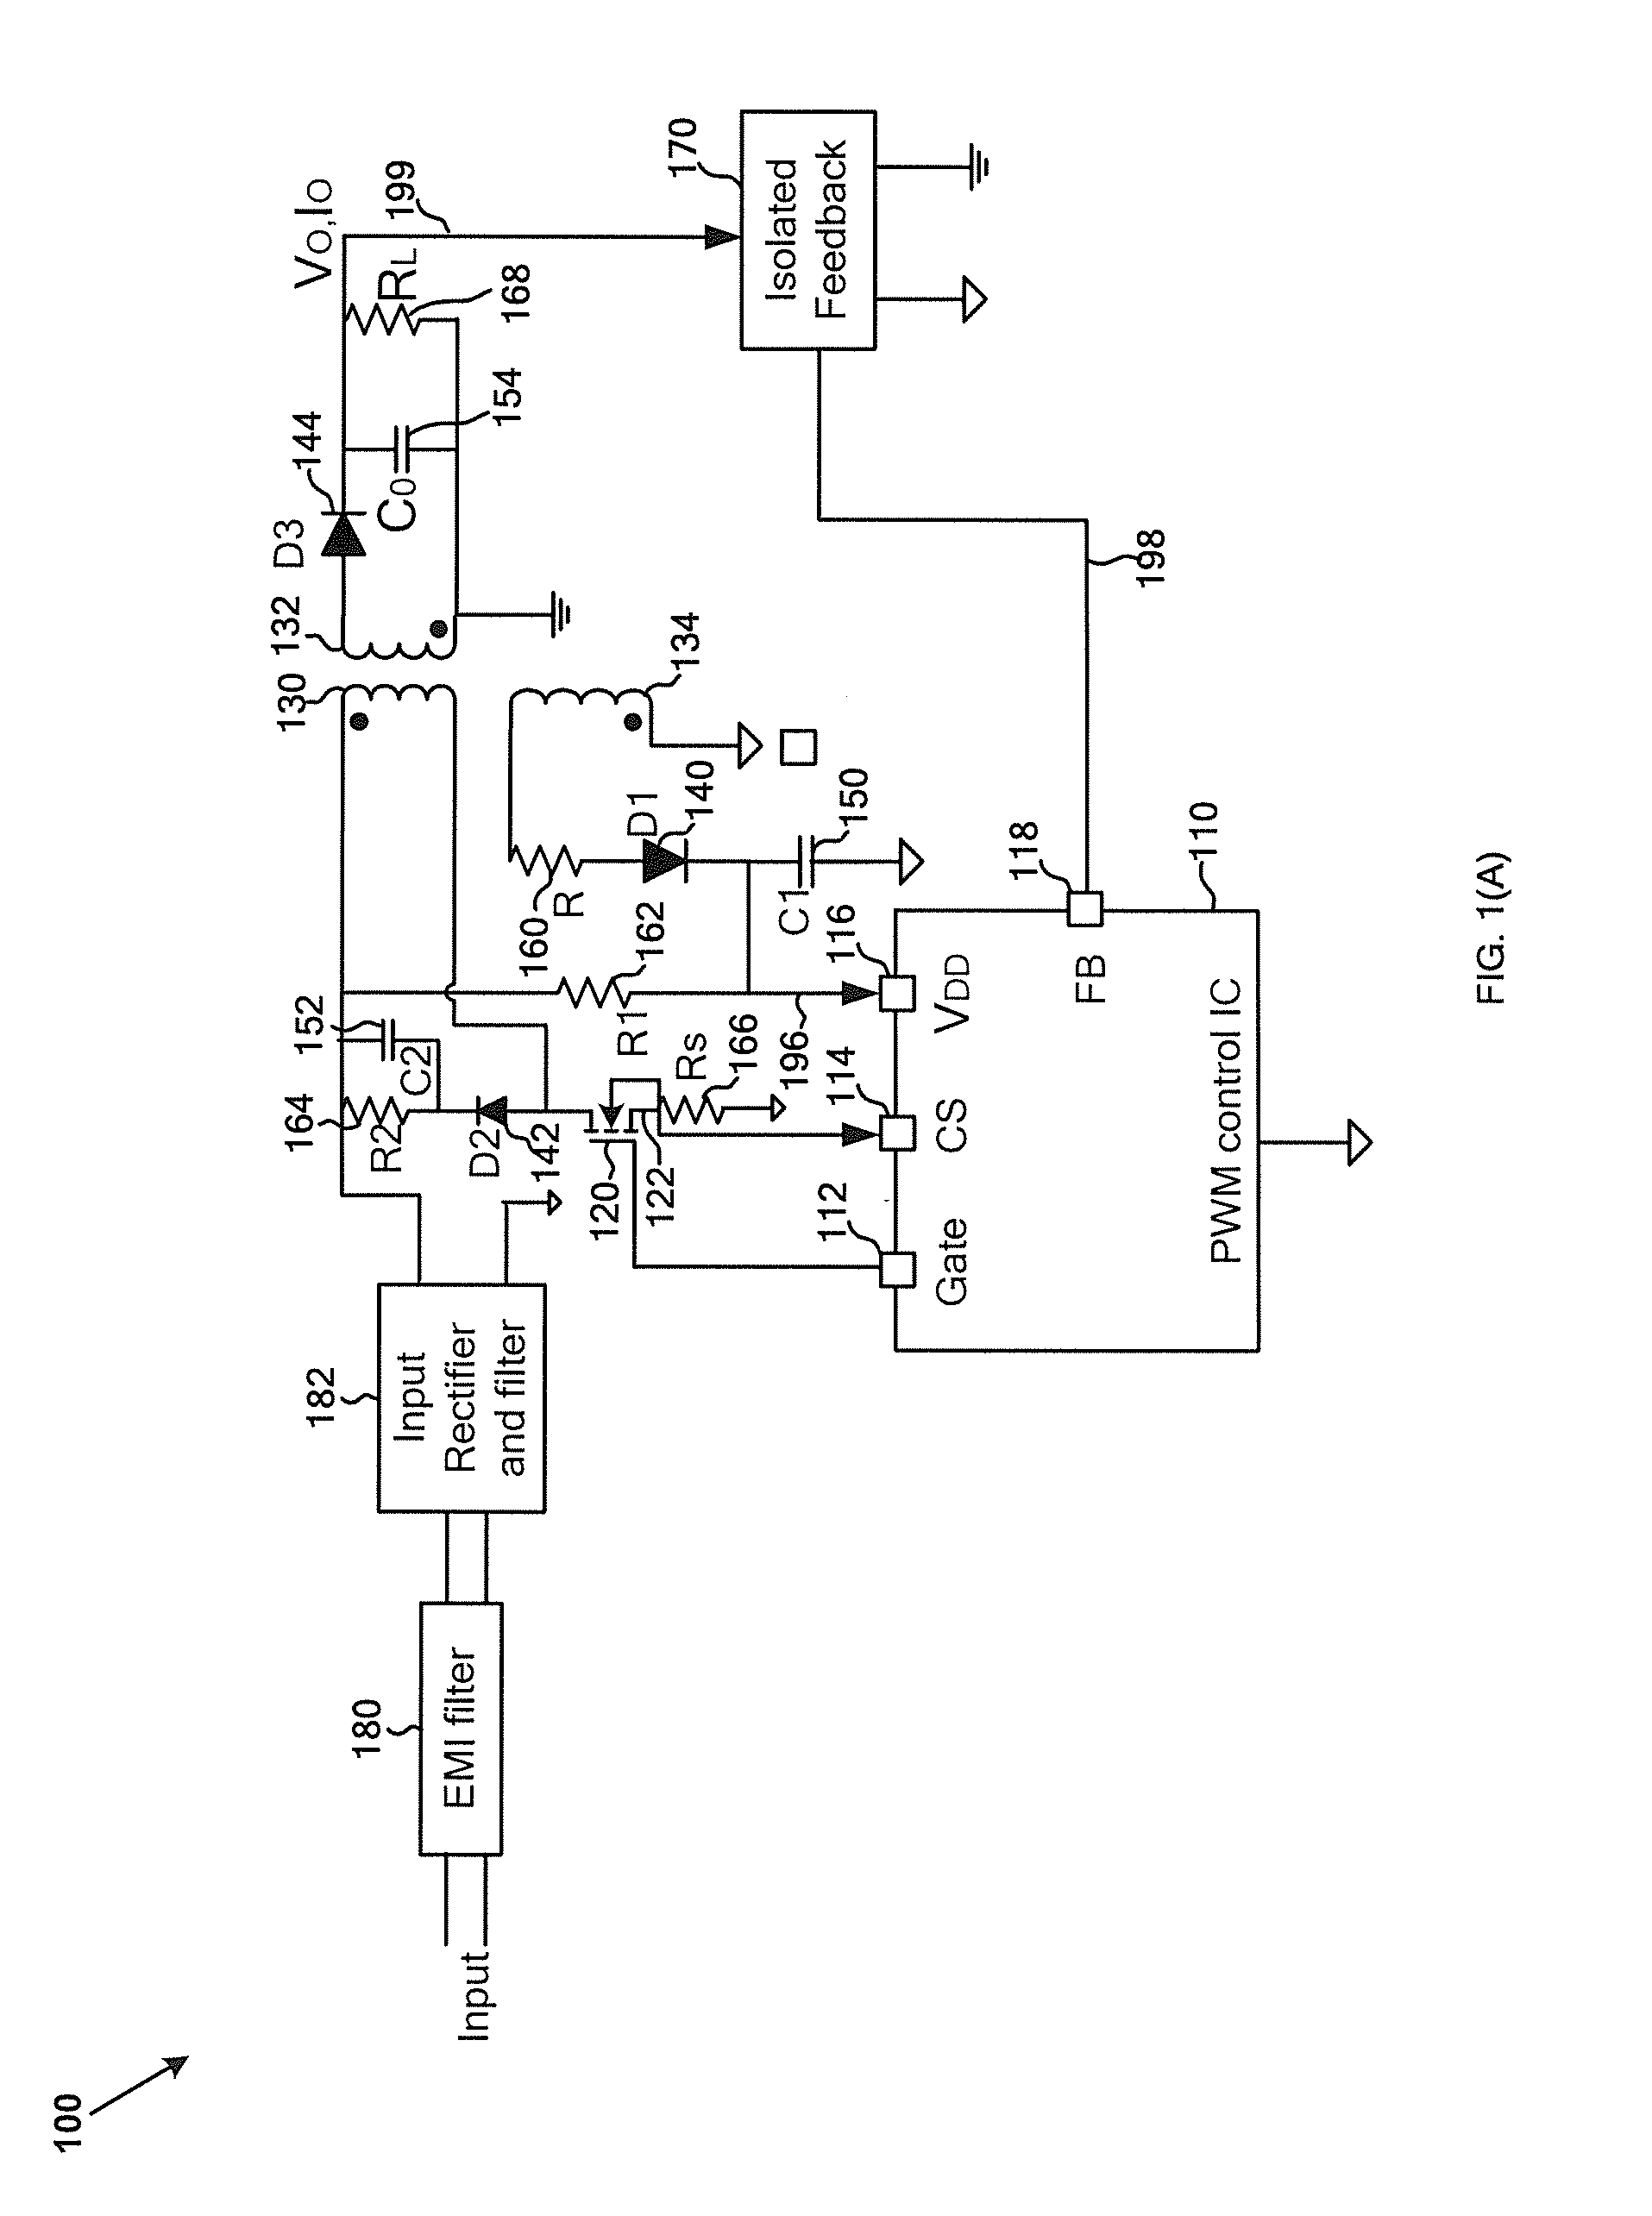 Systems and methods for adjusting current consumption of control chips to reduce standby power consumption of power converters